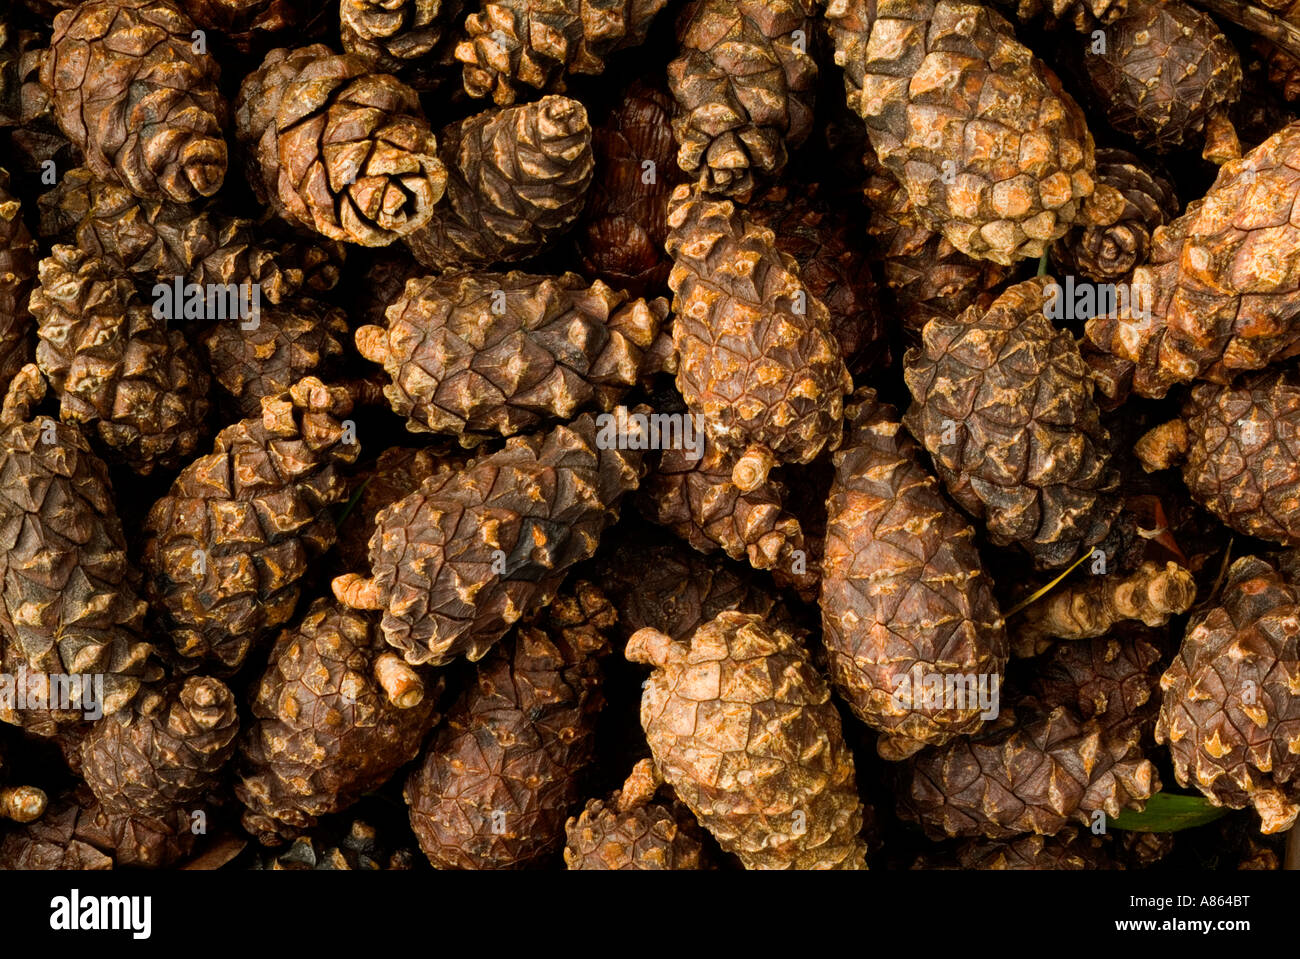 Pine cones fallen at the base of a pine tree create an interesting nature image shot in the english lake district during autumn Stock Photo